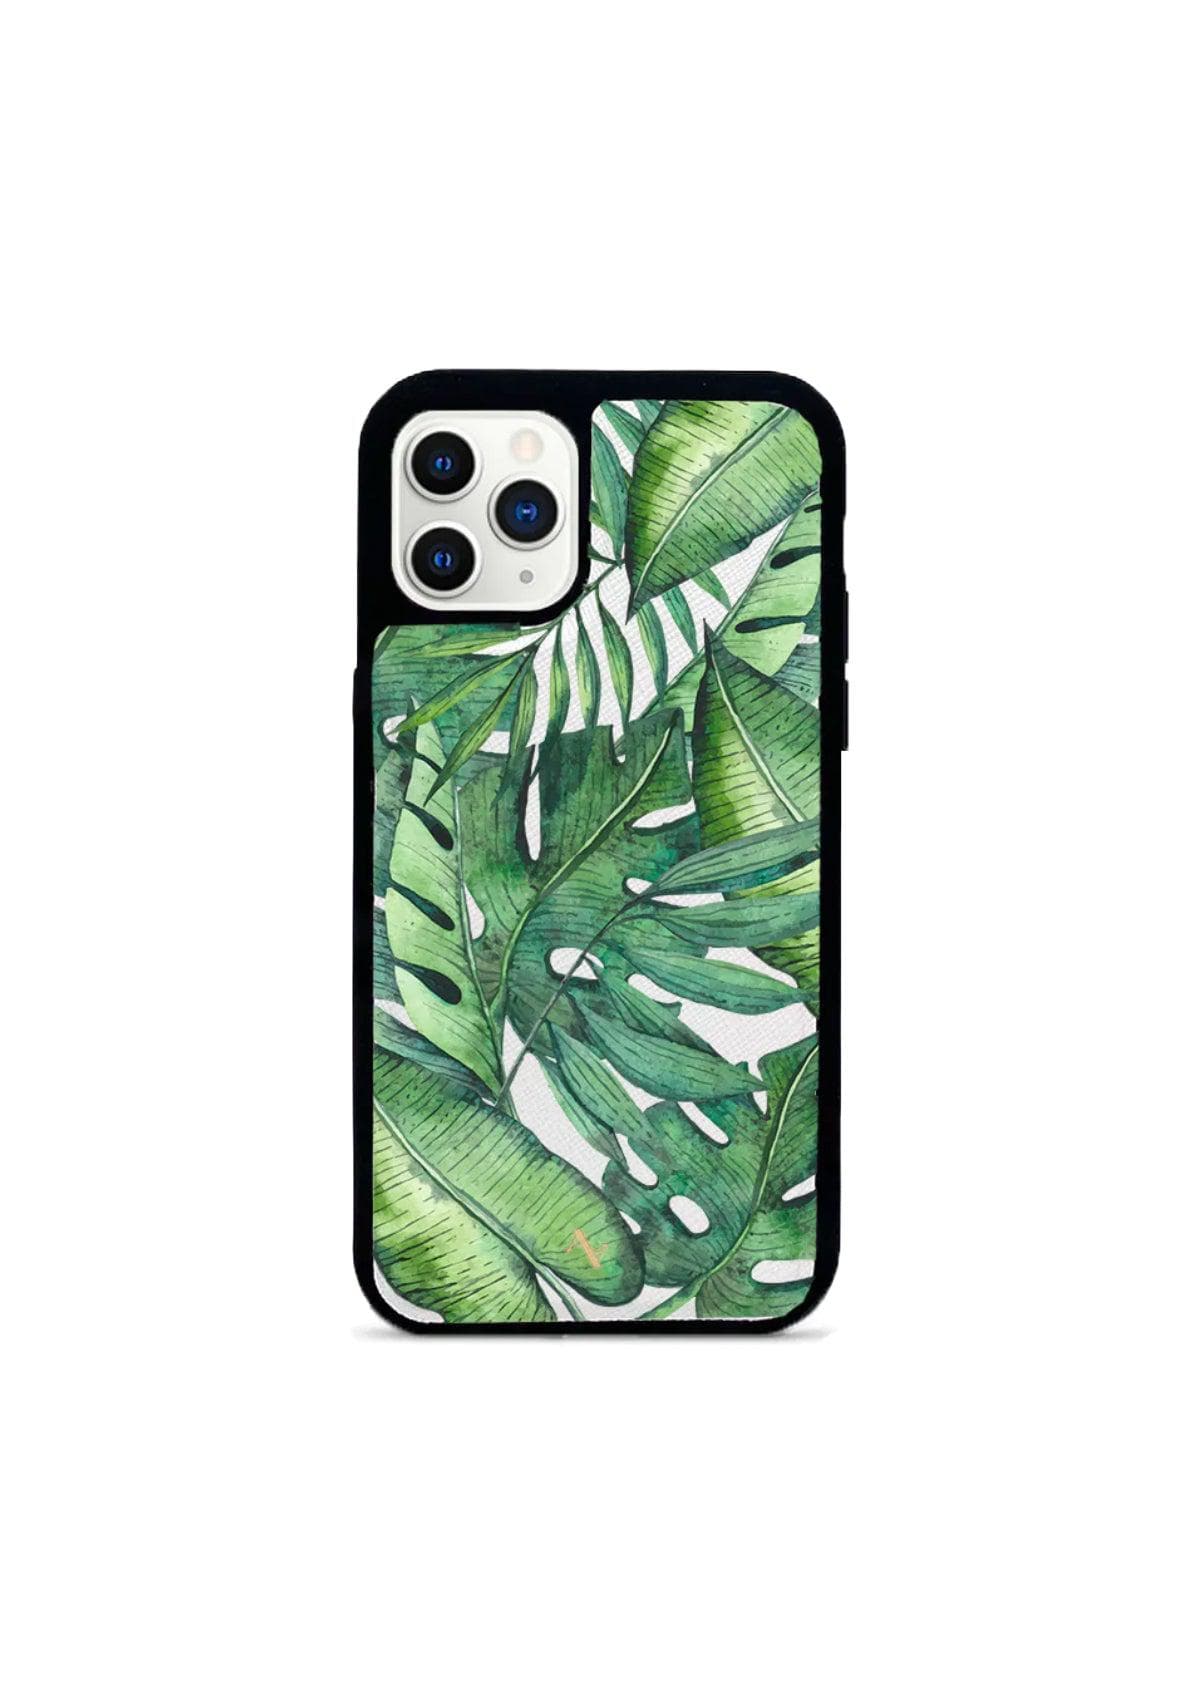 Maad iPhone Case Tropical Pants - Green 11 Pro